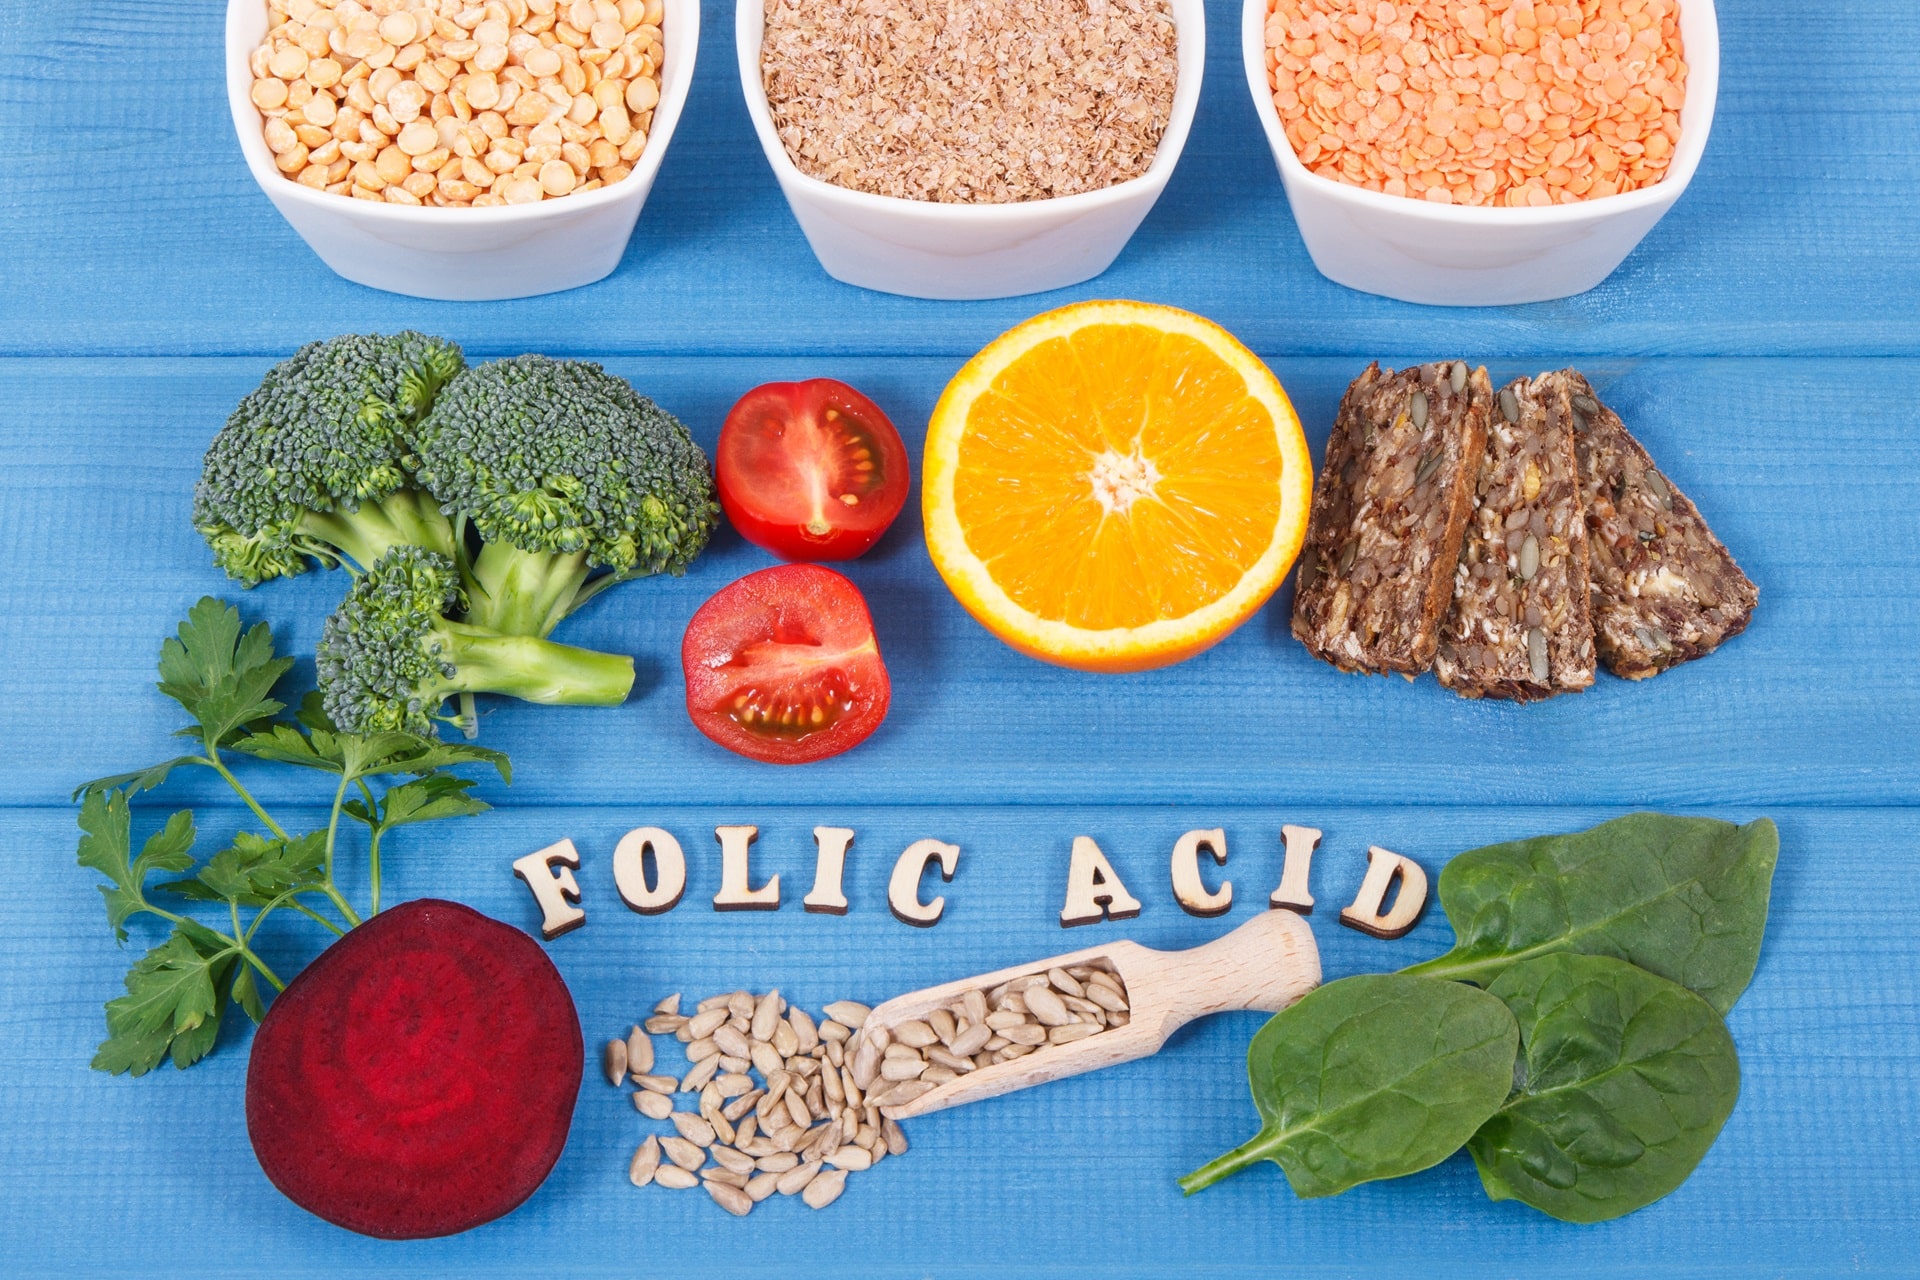 What is Folic Acid? What Does It Do?